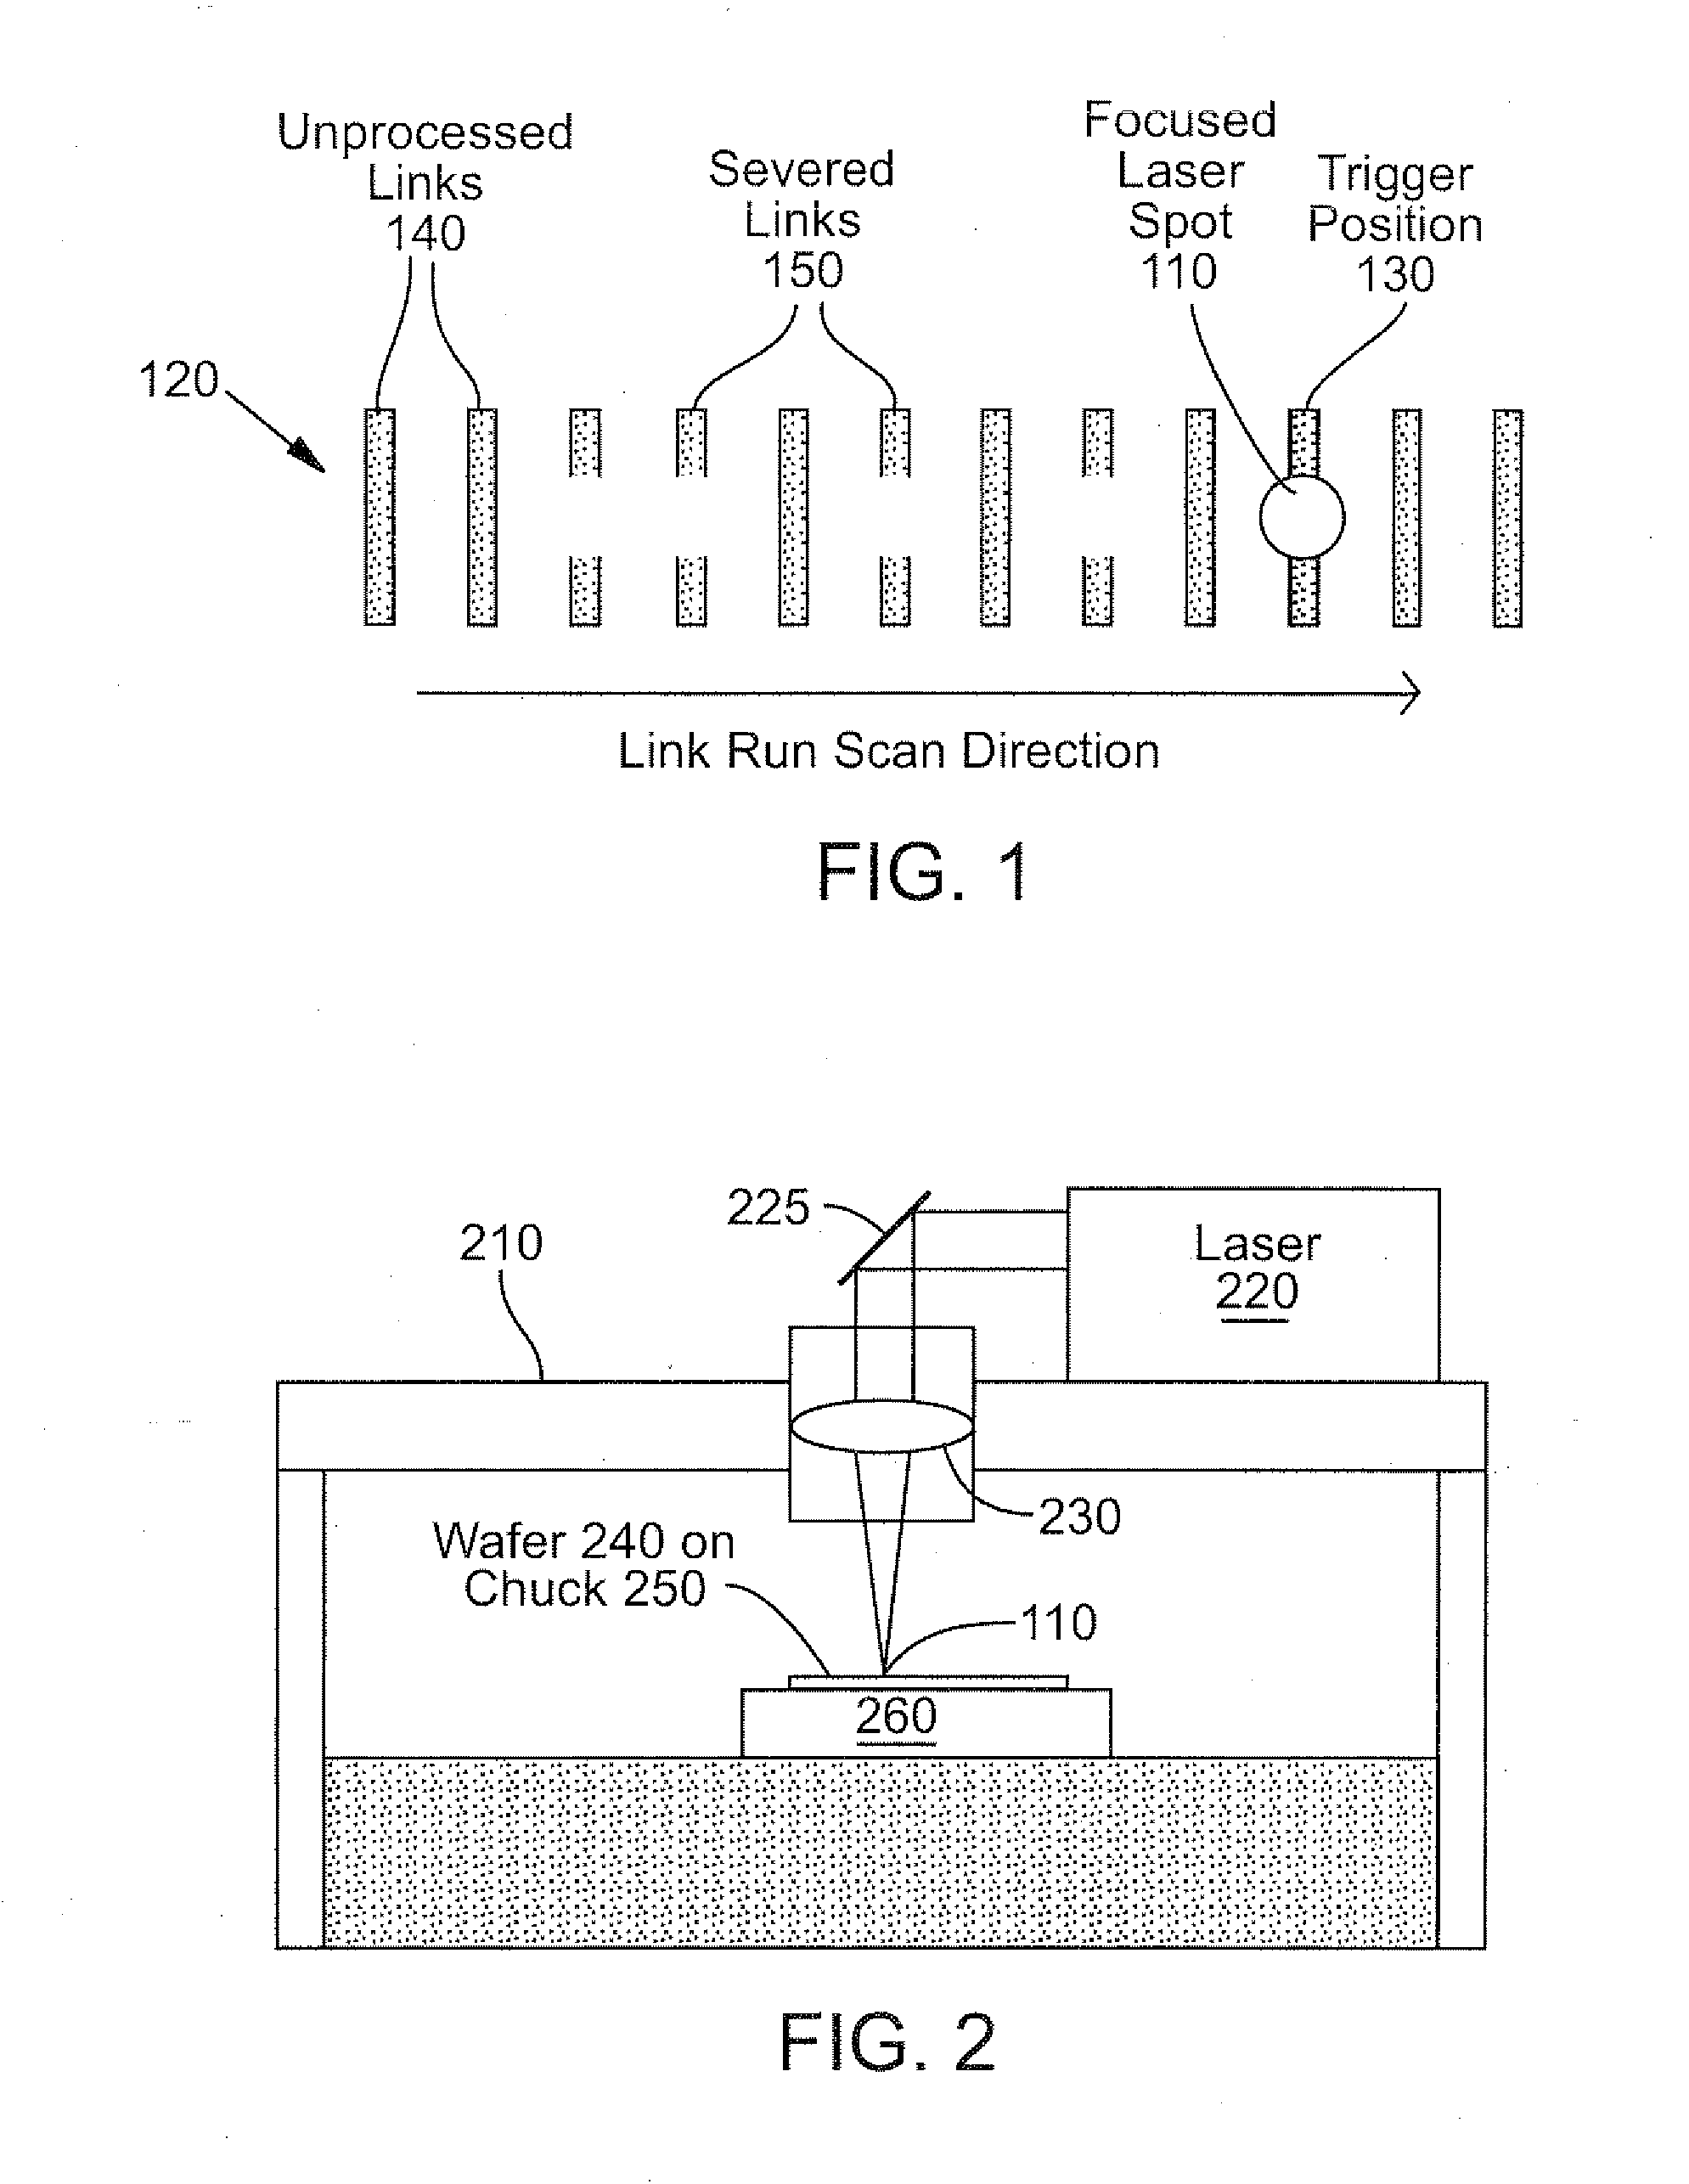 Systems and methods for semiconductor structure processing using multiple laser beam spots